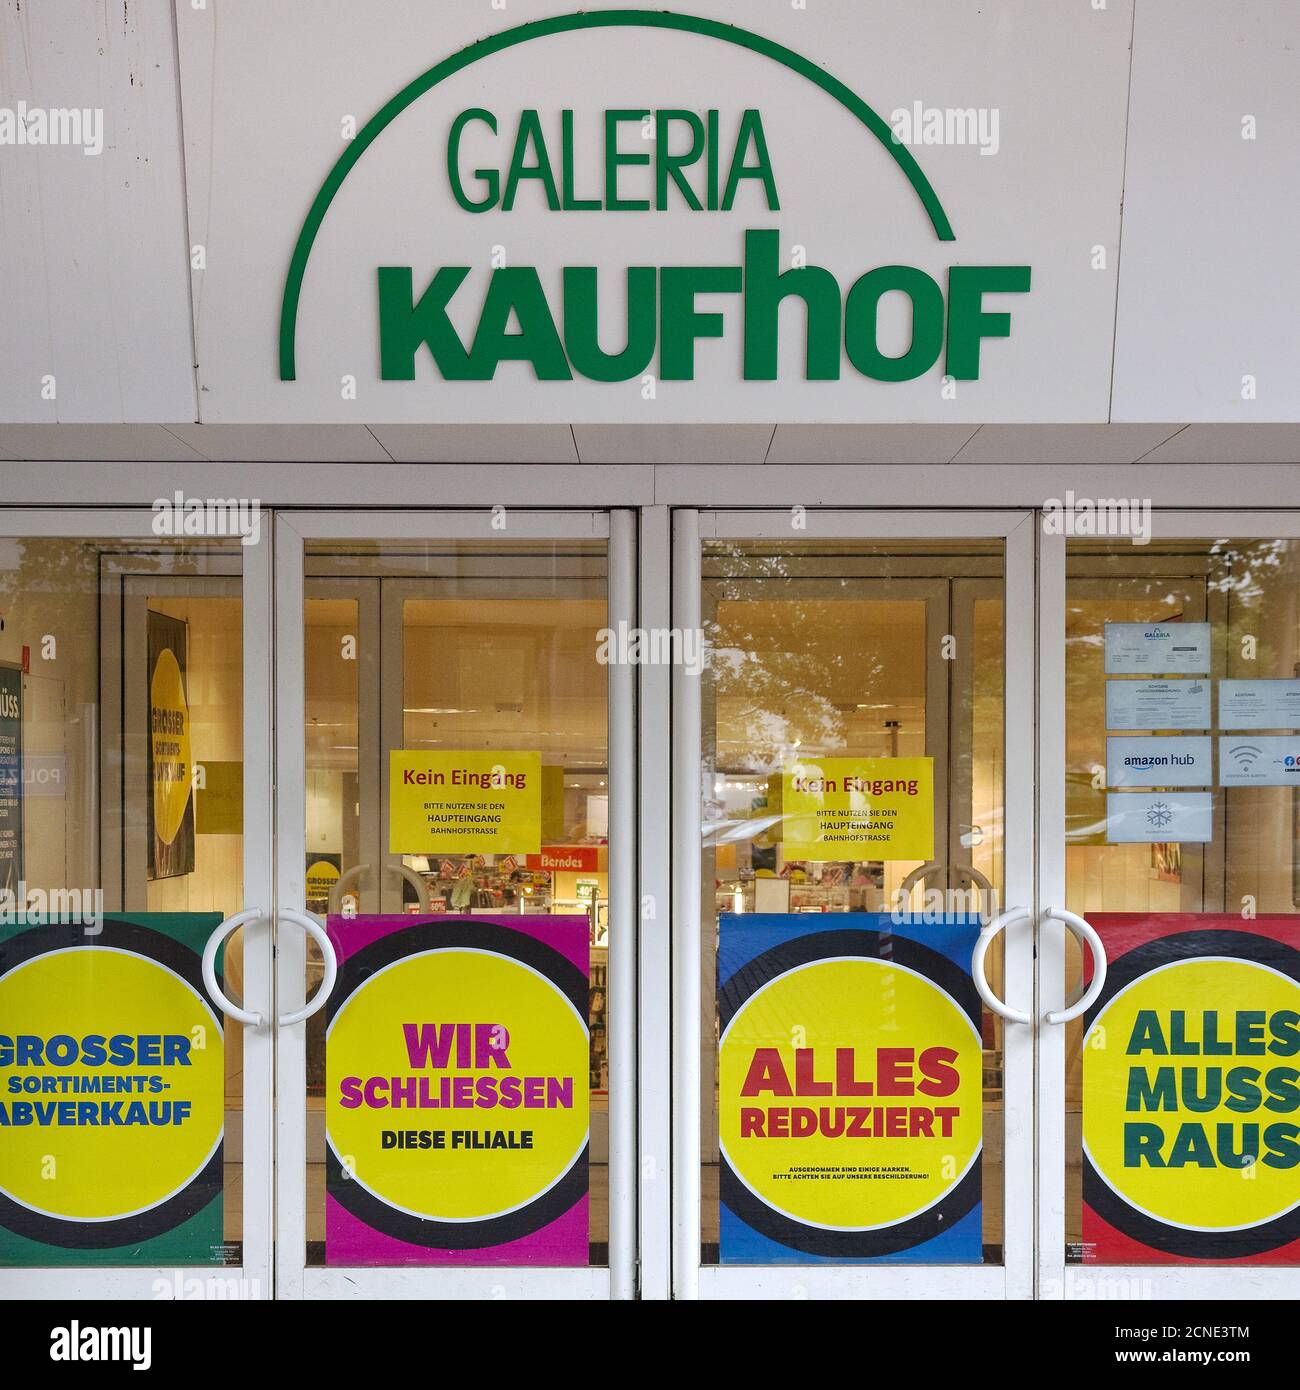 Galeria Kaufhof High Resolution Stock Photography and Images - Alamy